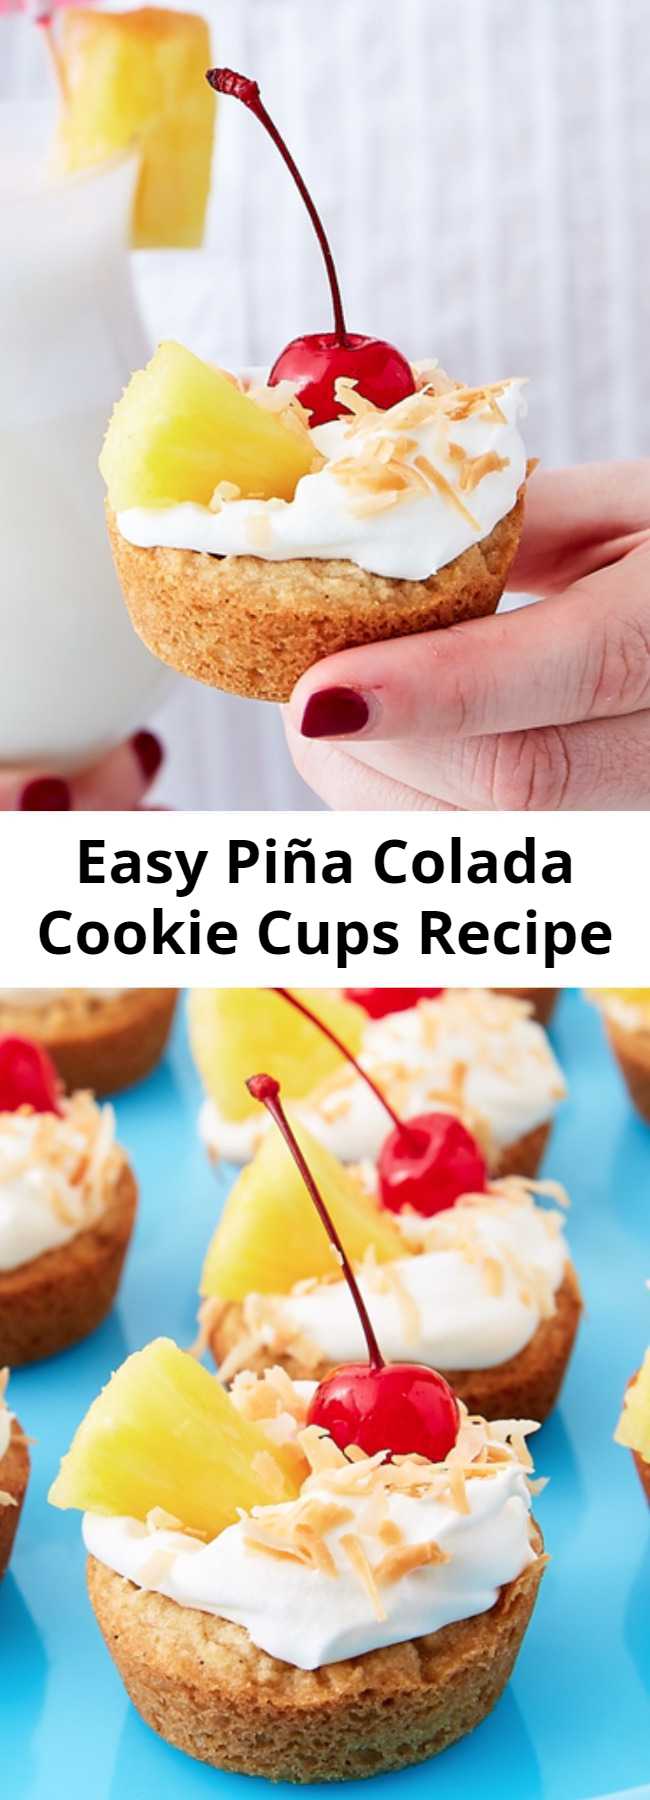 Easy Piña Colada Cookie Cups Recipe - The filling tastes like a cross between a slice of cheesecake and a piña colada. If you're bringing these to a party with little ones, feel free to skip the booze.